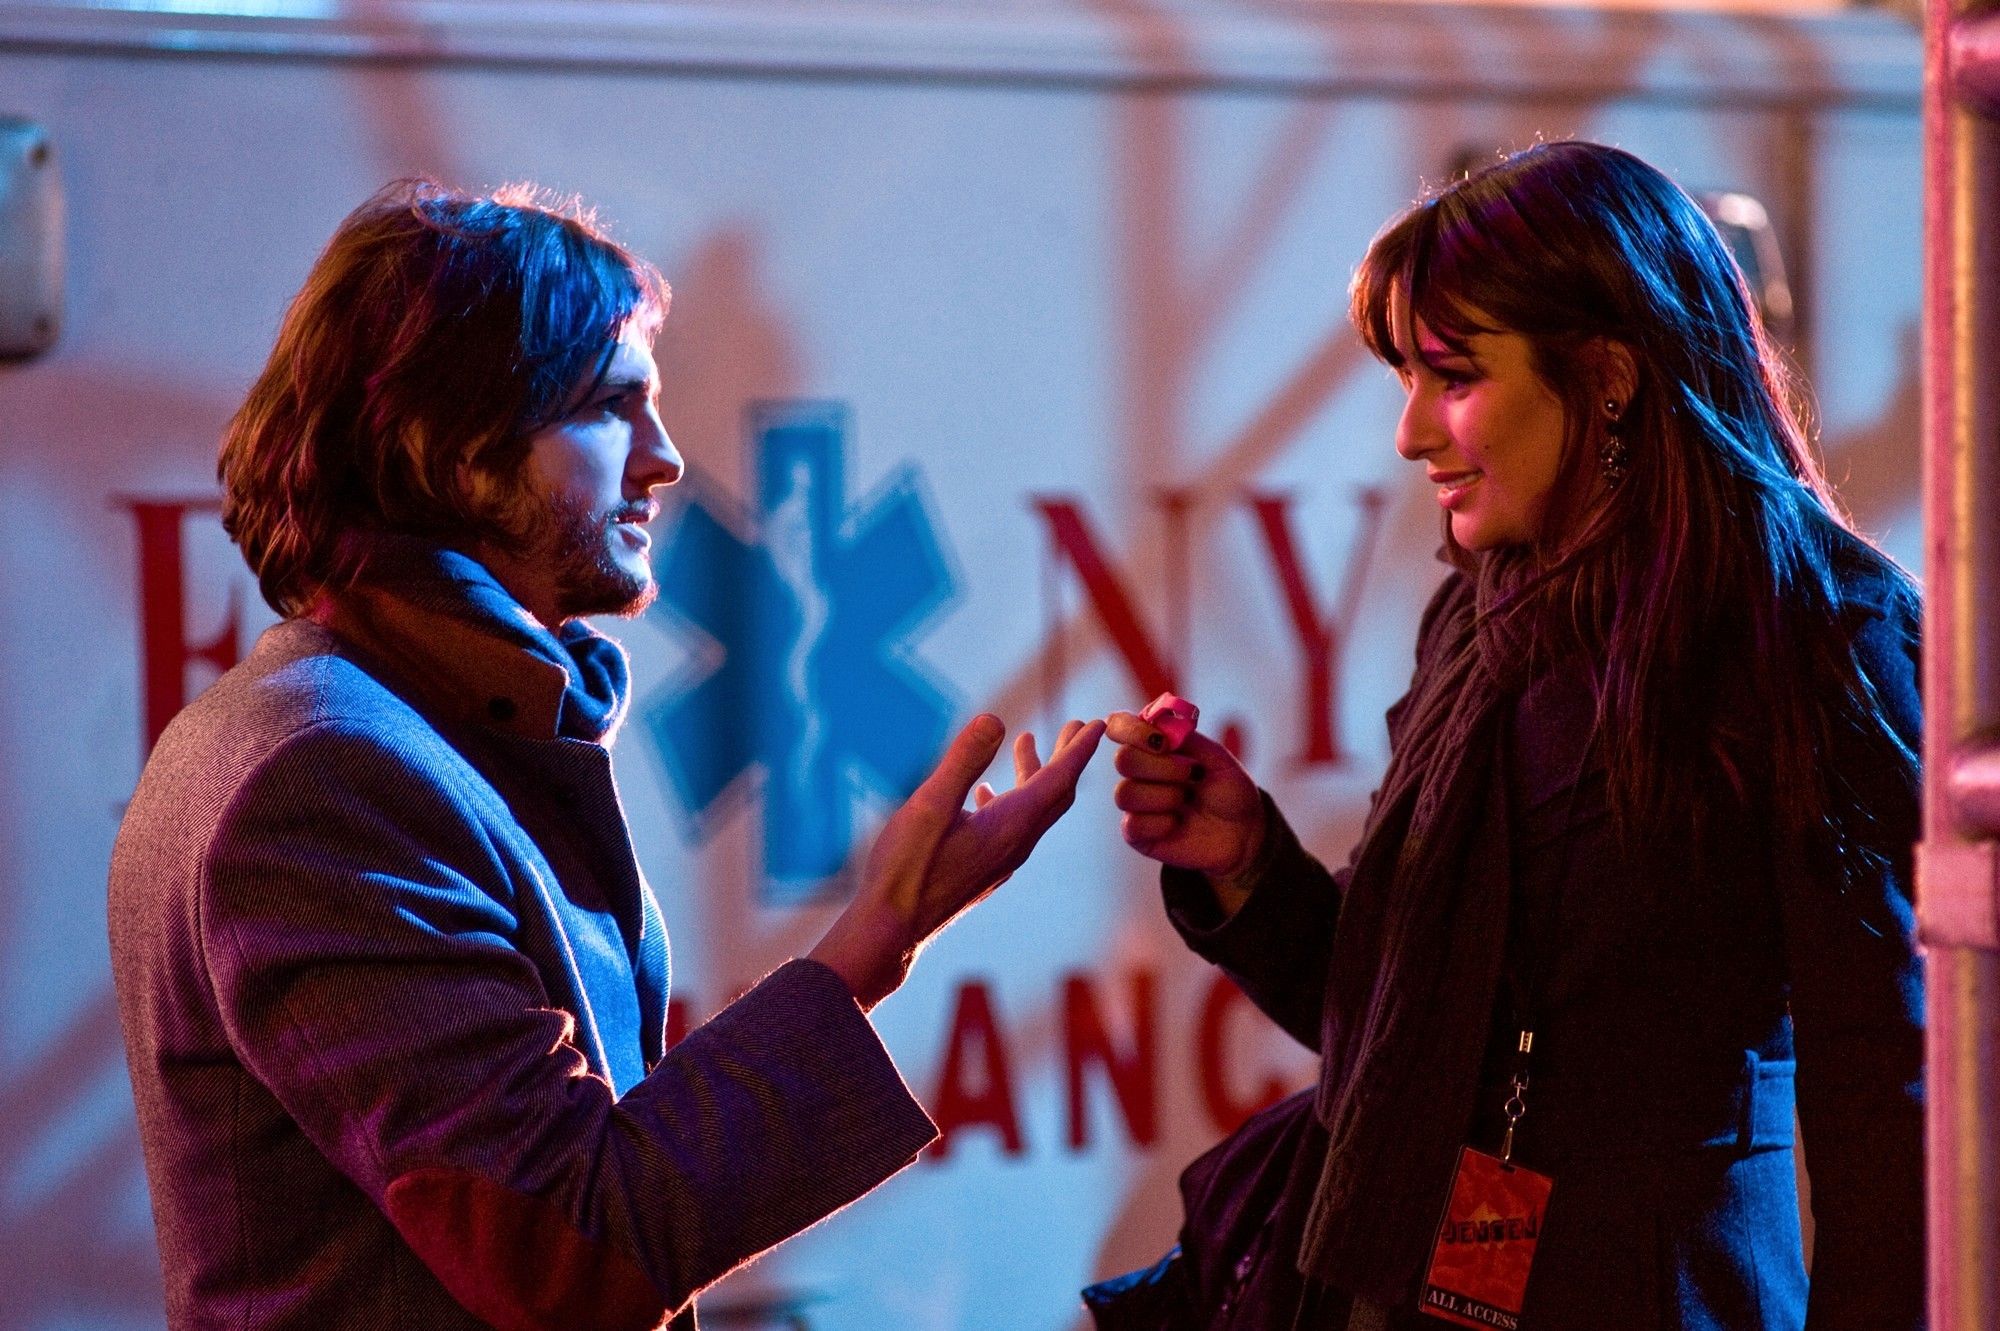 Ashton Kutcher stars as Randy and Lea Michele stars as Elise in Warner Bros. Pictures' New Year's Eve (2011). Photo credit by Andrew Schwartz.